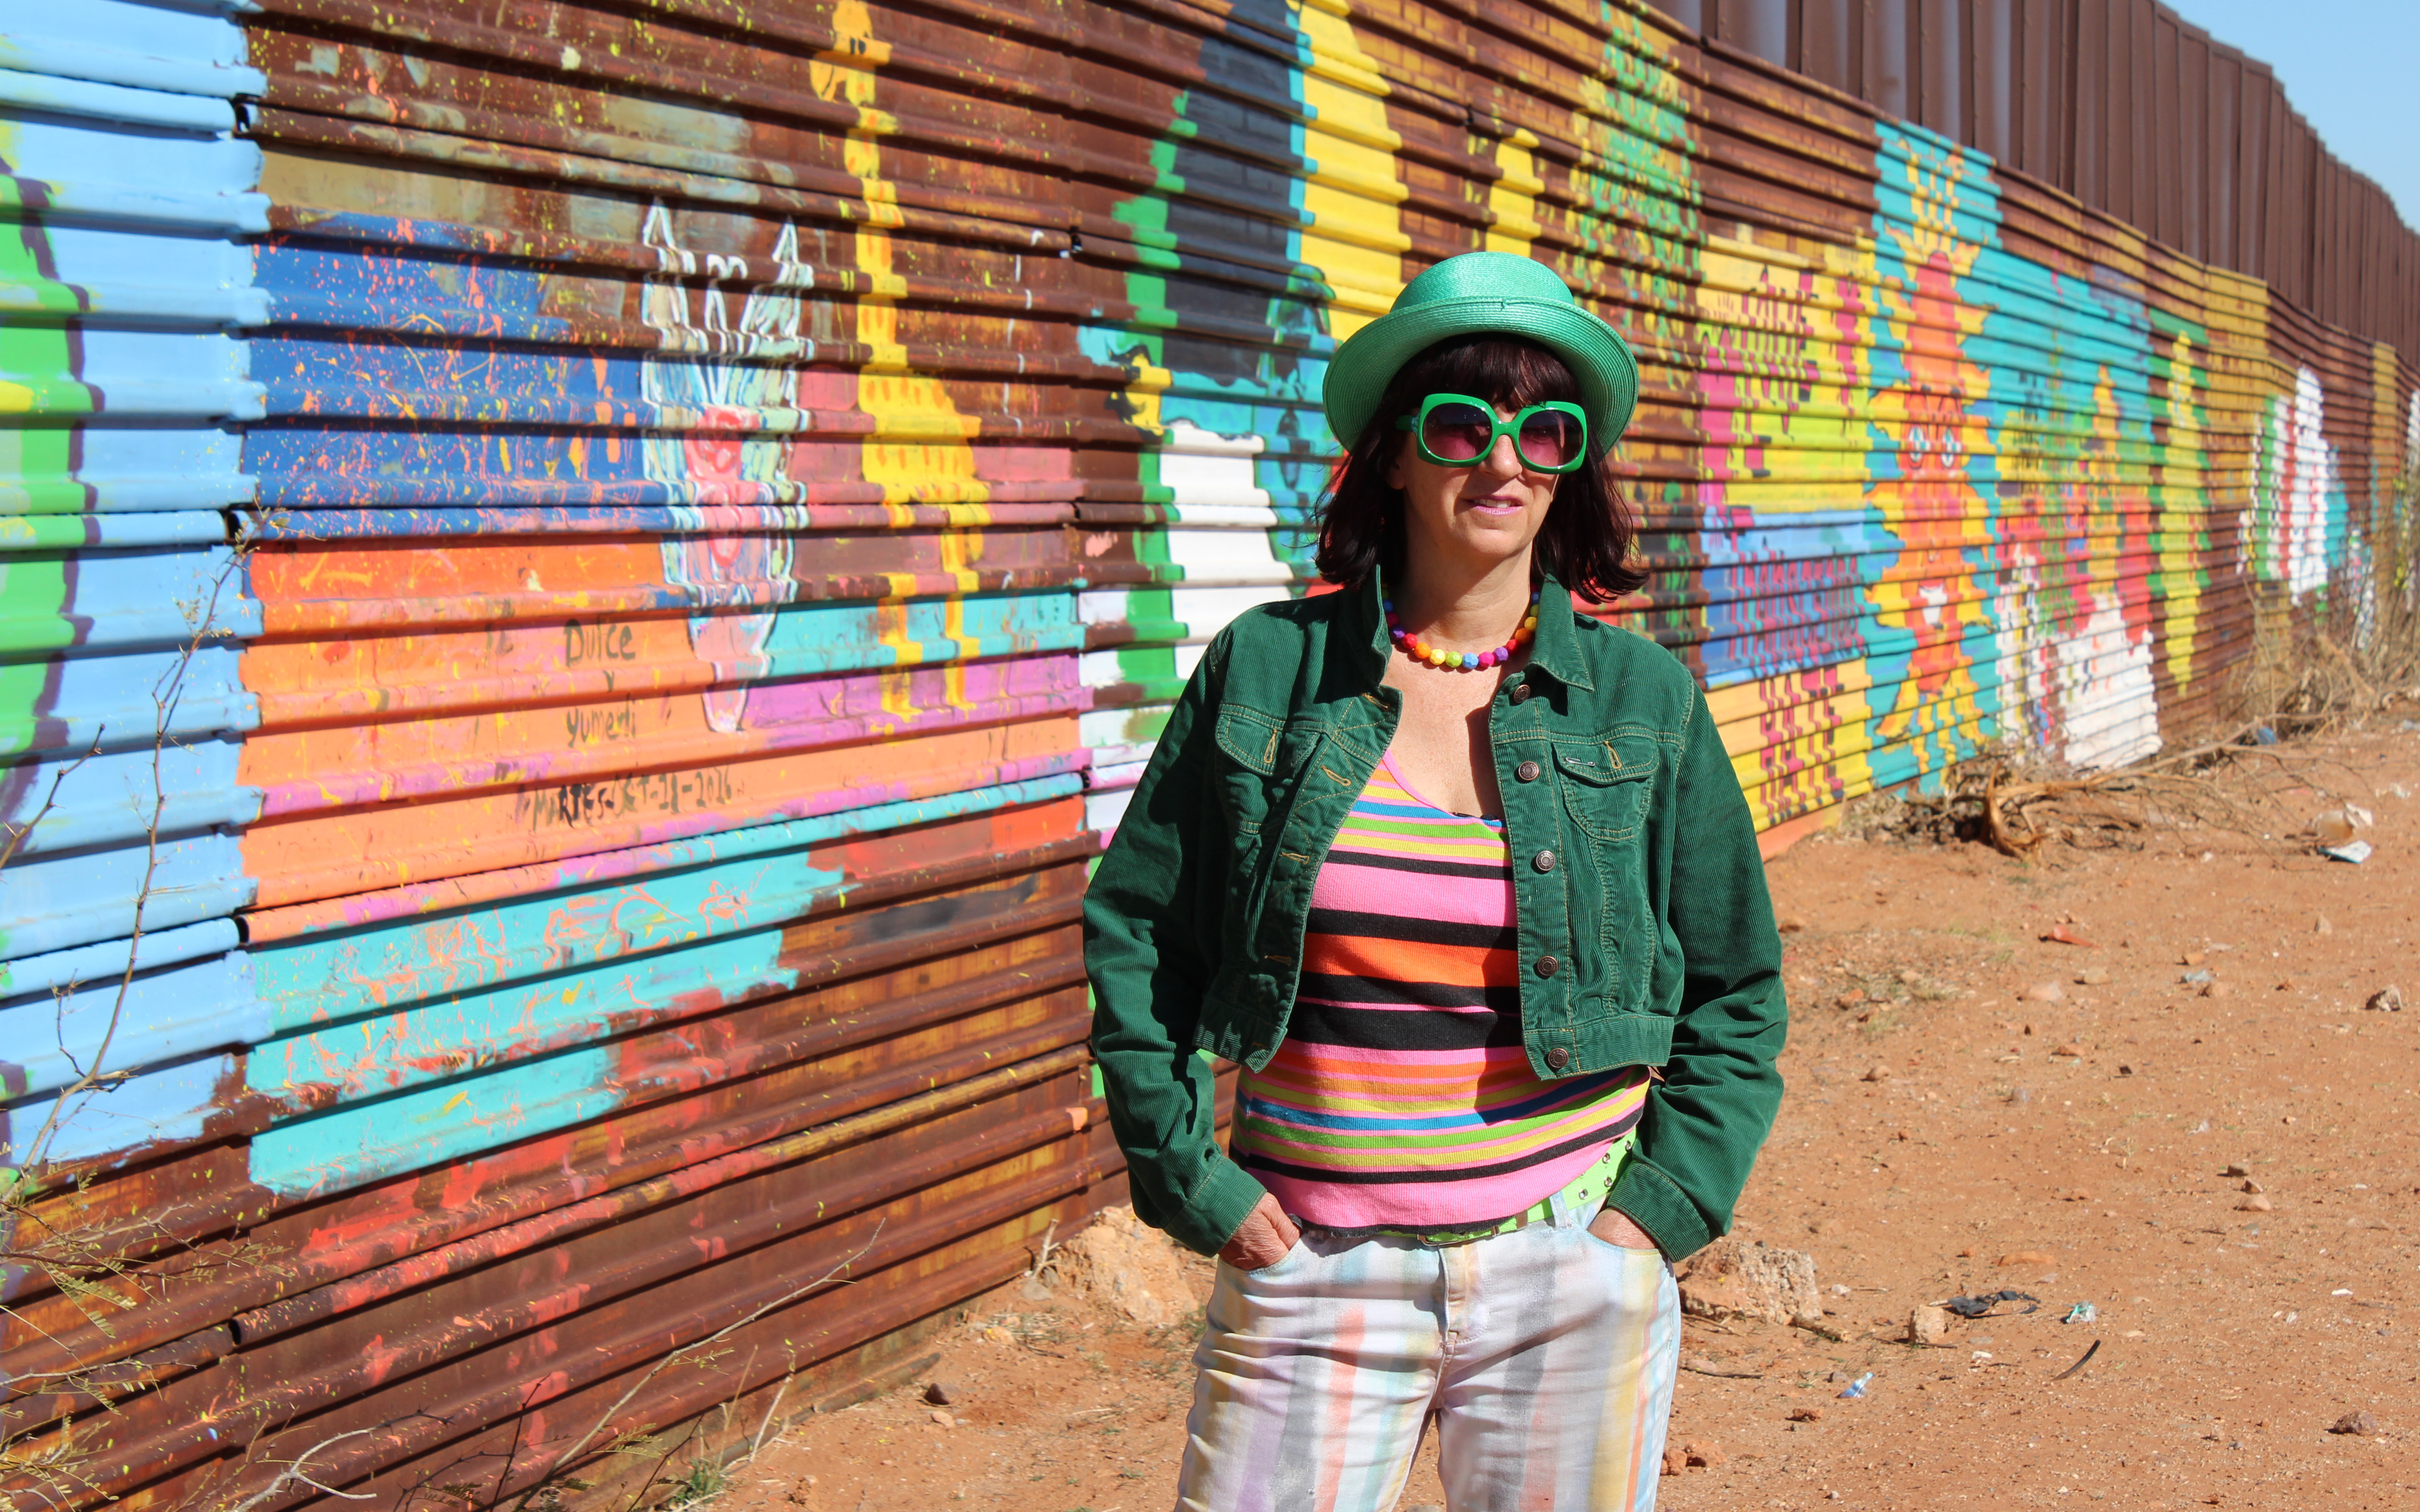 Gretchen Baer, a Bisbee, Arizona artist created The Border Bedazzlers, which used the border fence into a canvas for art by children. (Photo by Charlene Santiago/Cronkite News)